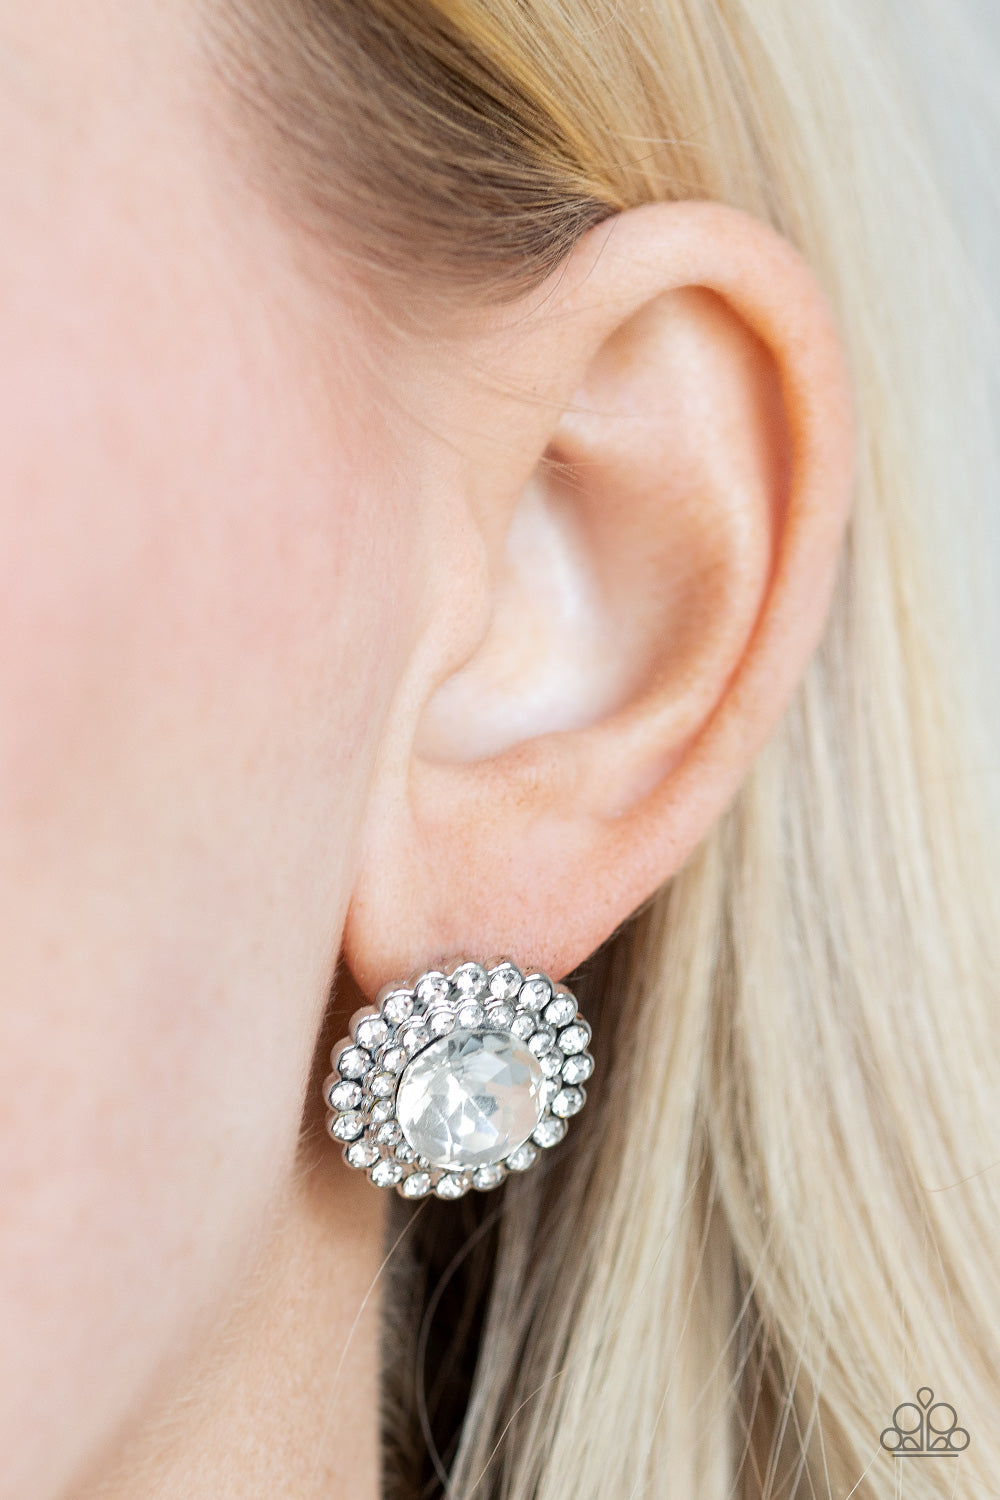 Incredibly Iconic - White - Silver Earrings - Paparazzi Accessories